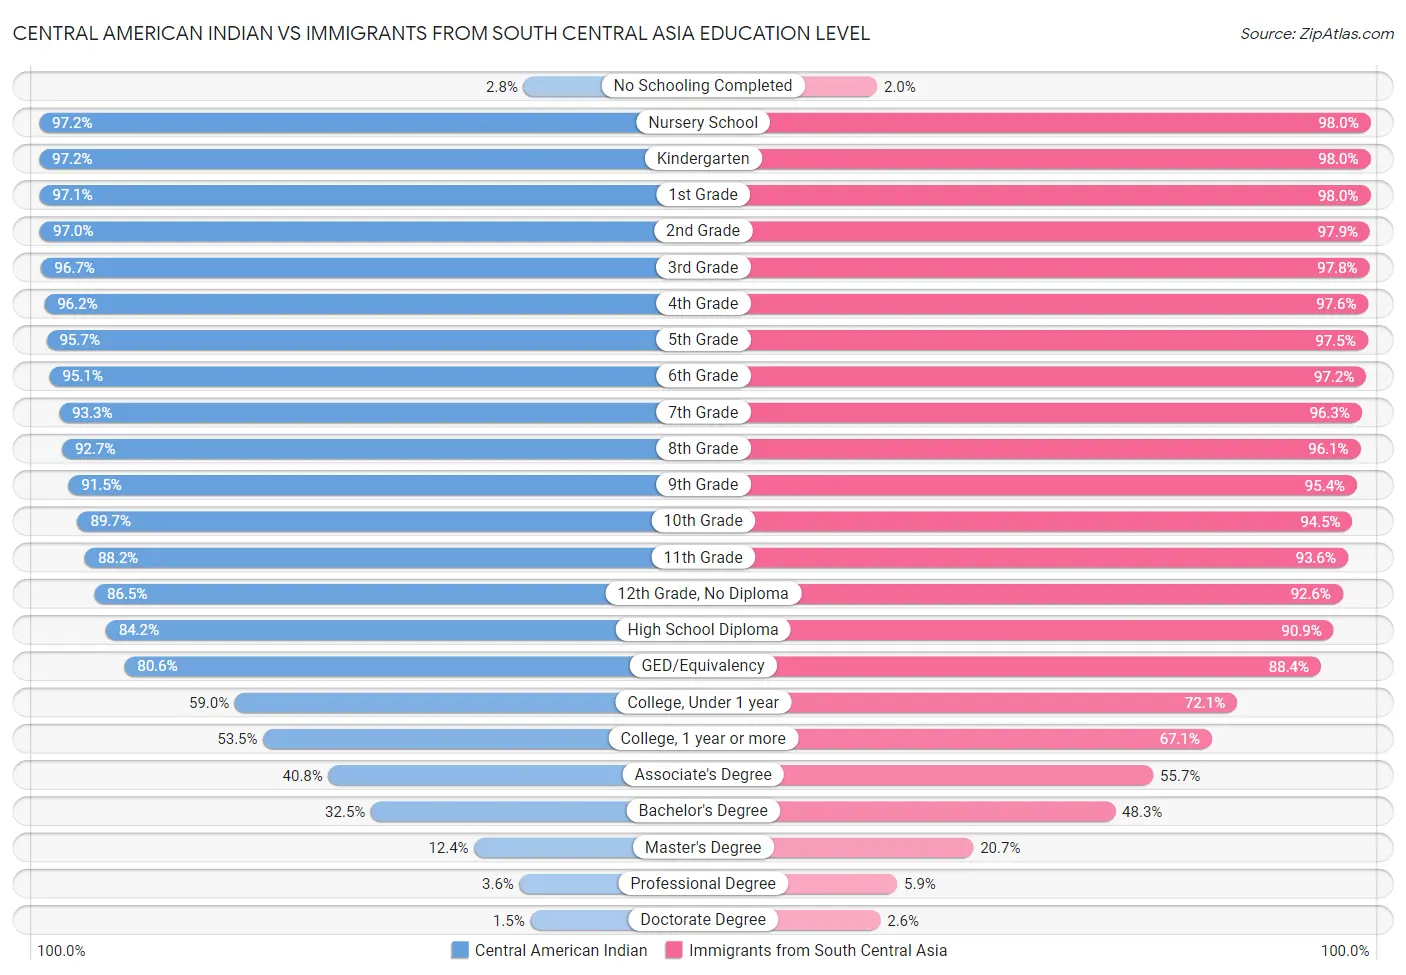 Central American Indian vs Immigrants from South Central Asia Education Level